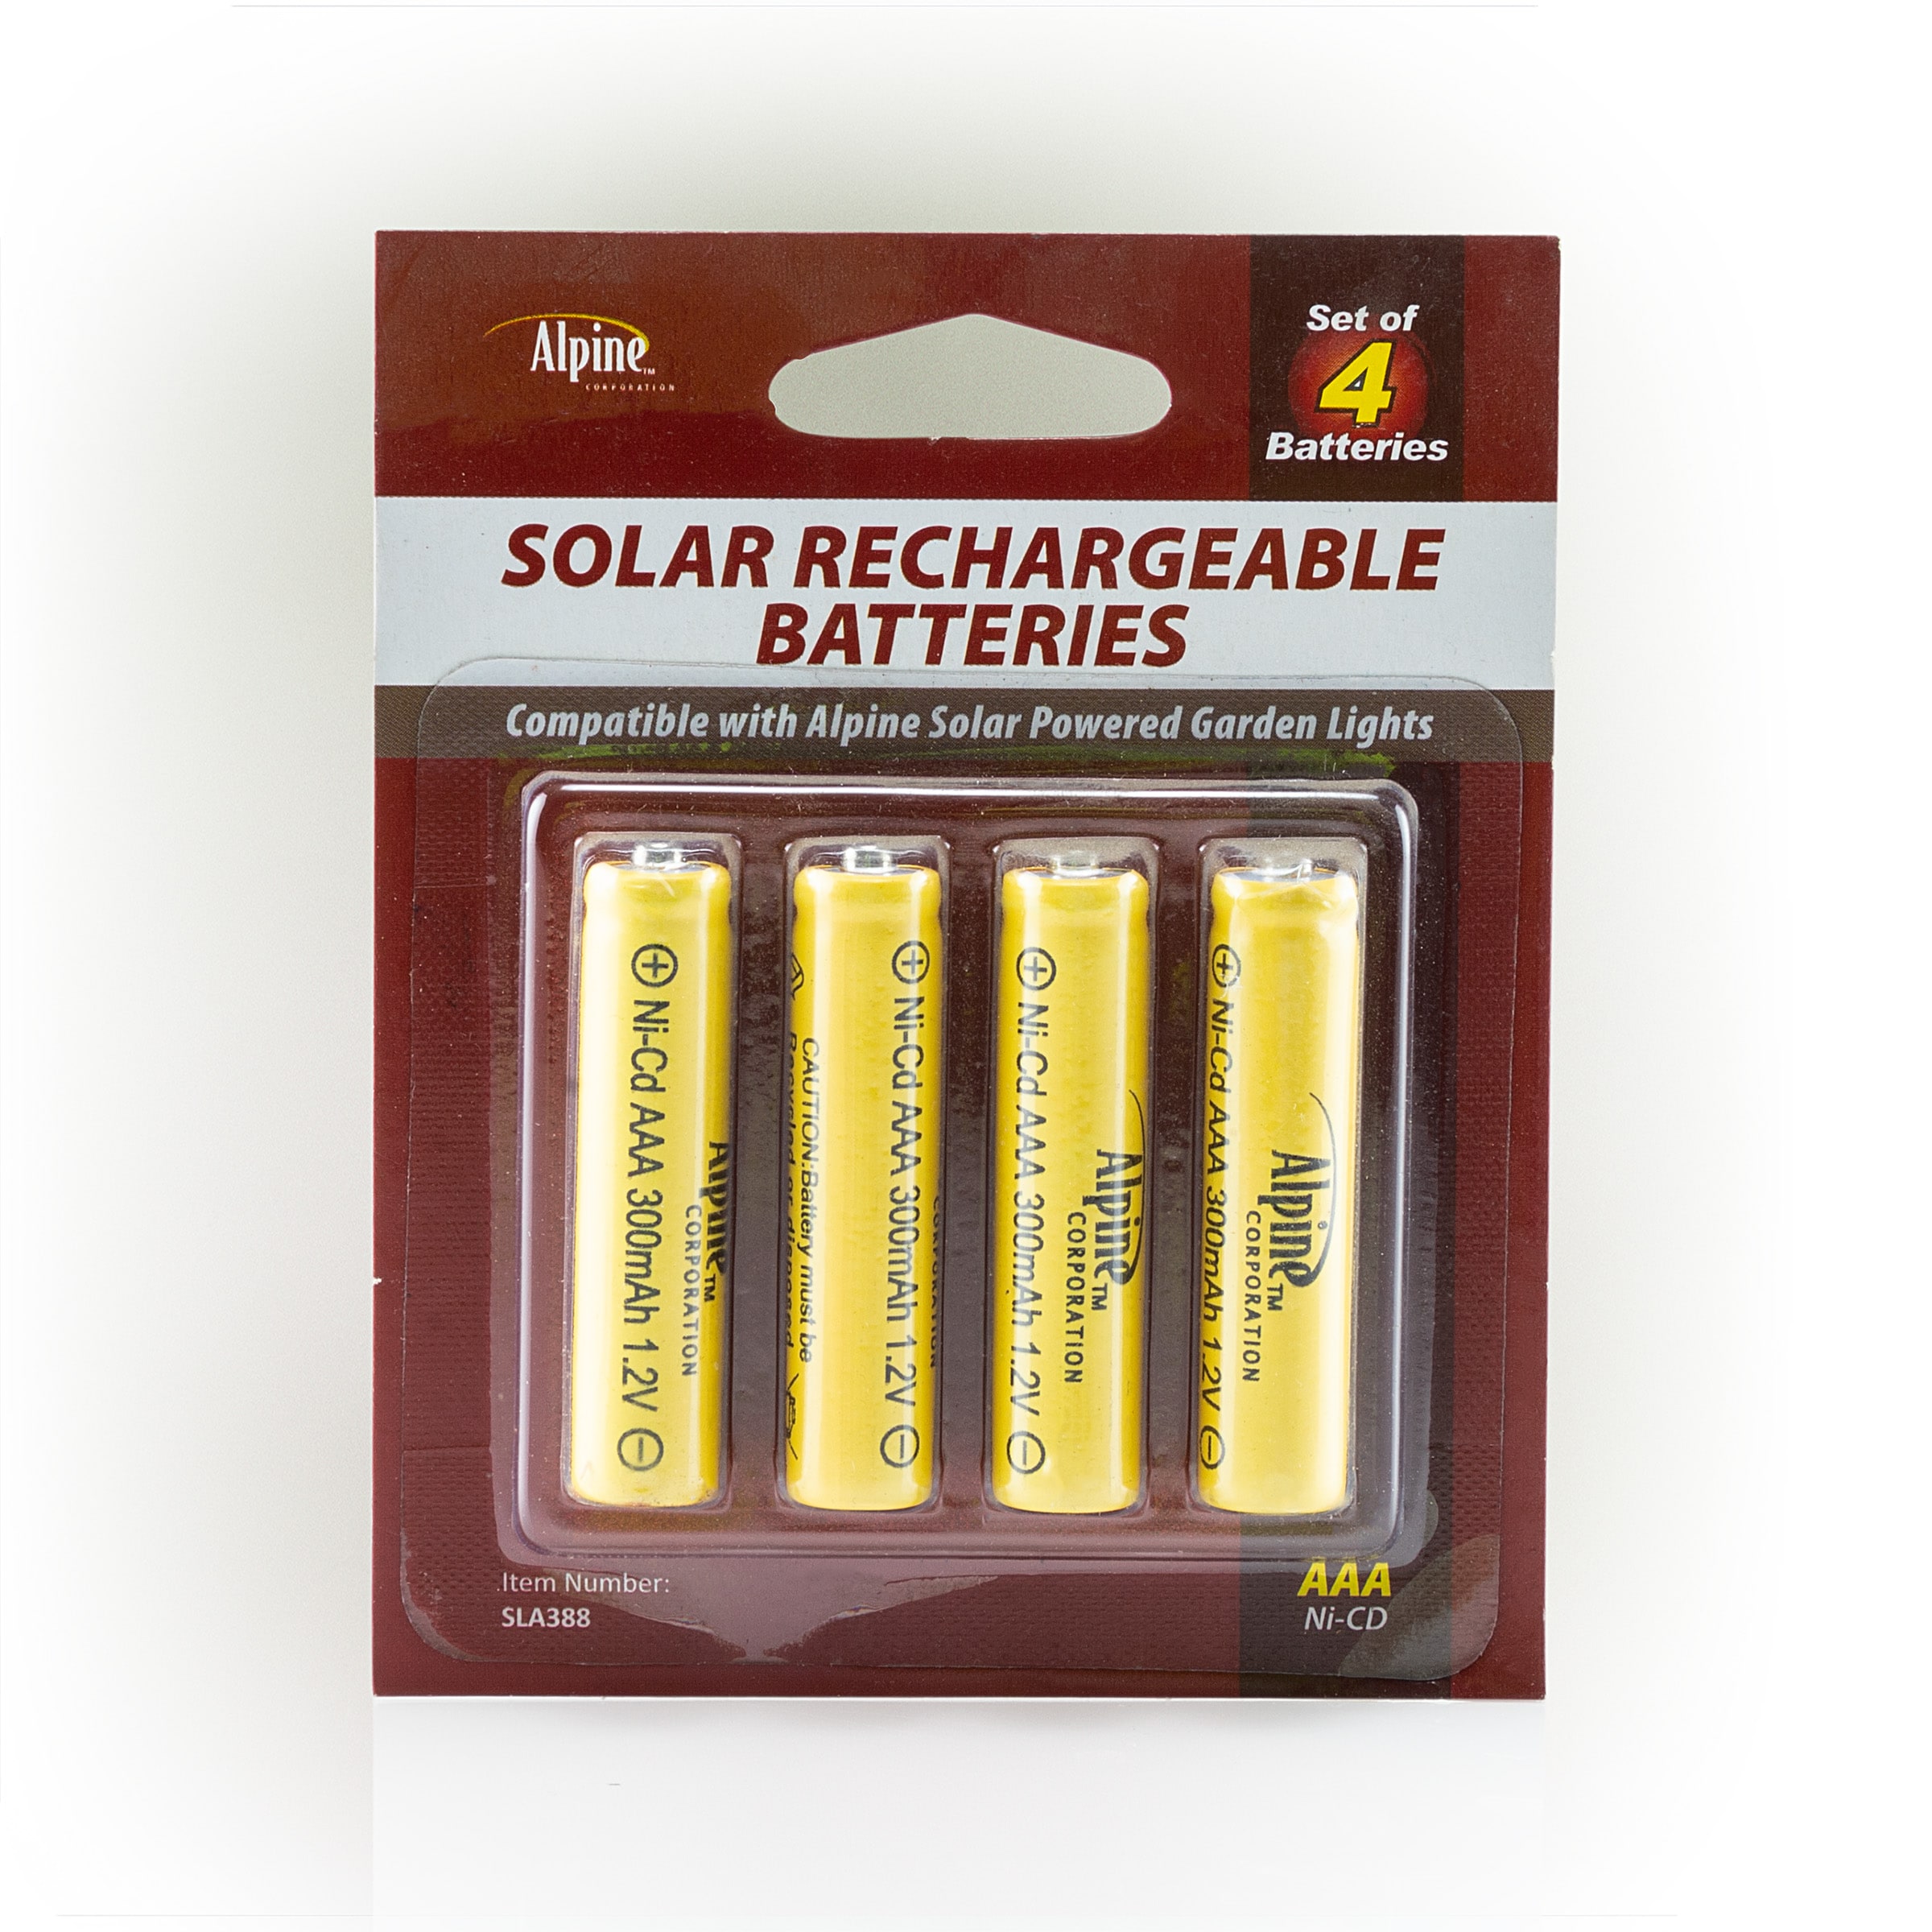 Alpine Corporation Ni-CD Replacements for Solar Powered Garden Lights  Rechargeable Nickel Cadmium (Nicd) AAA Batteries (4-Pack)